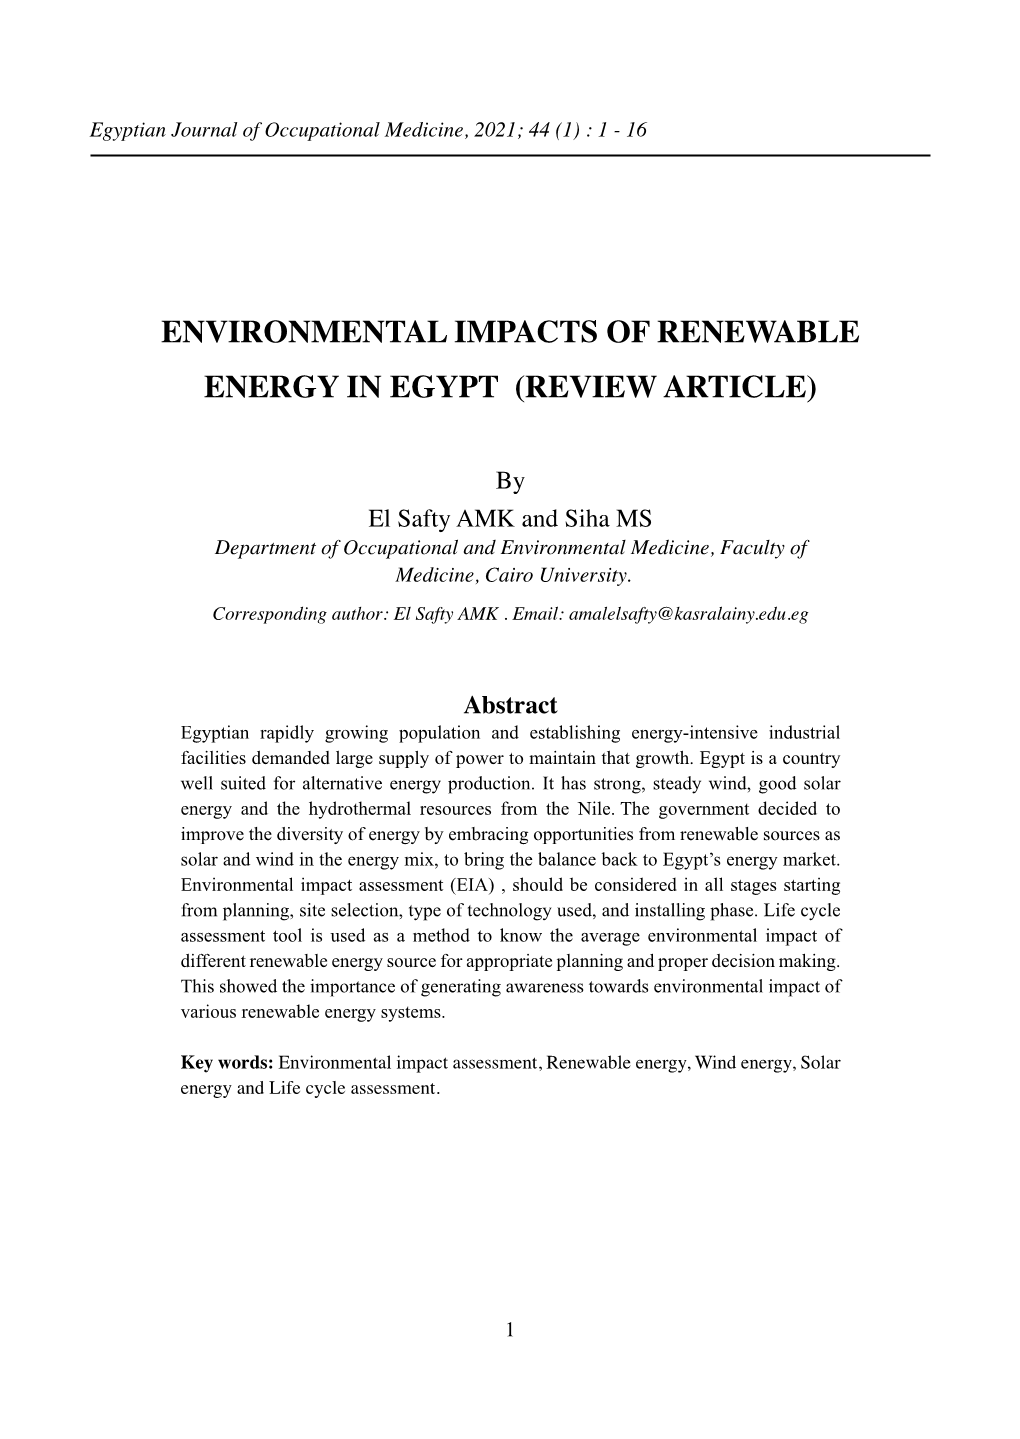 Environmental Impacts of Renewable Energy in Egypt (Review Article)